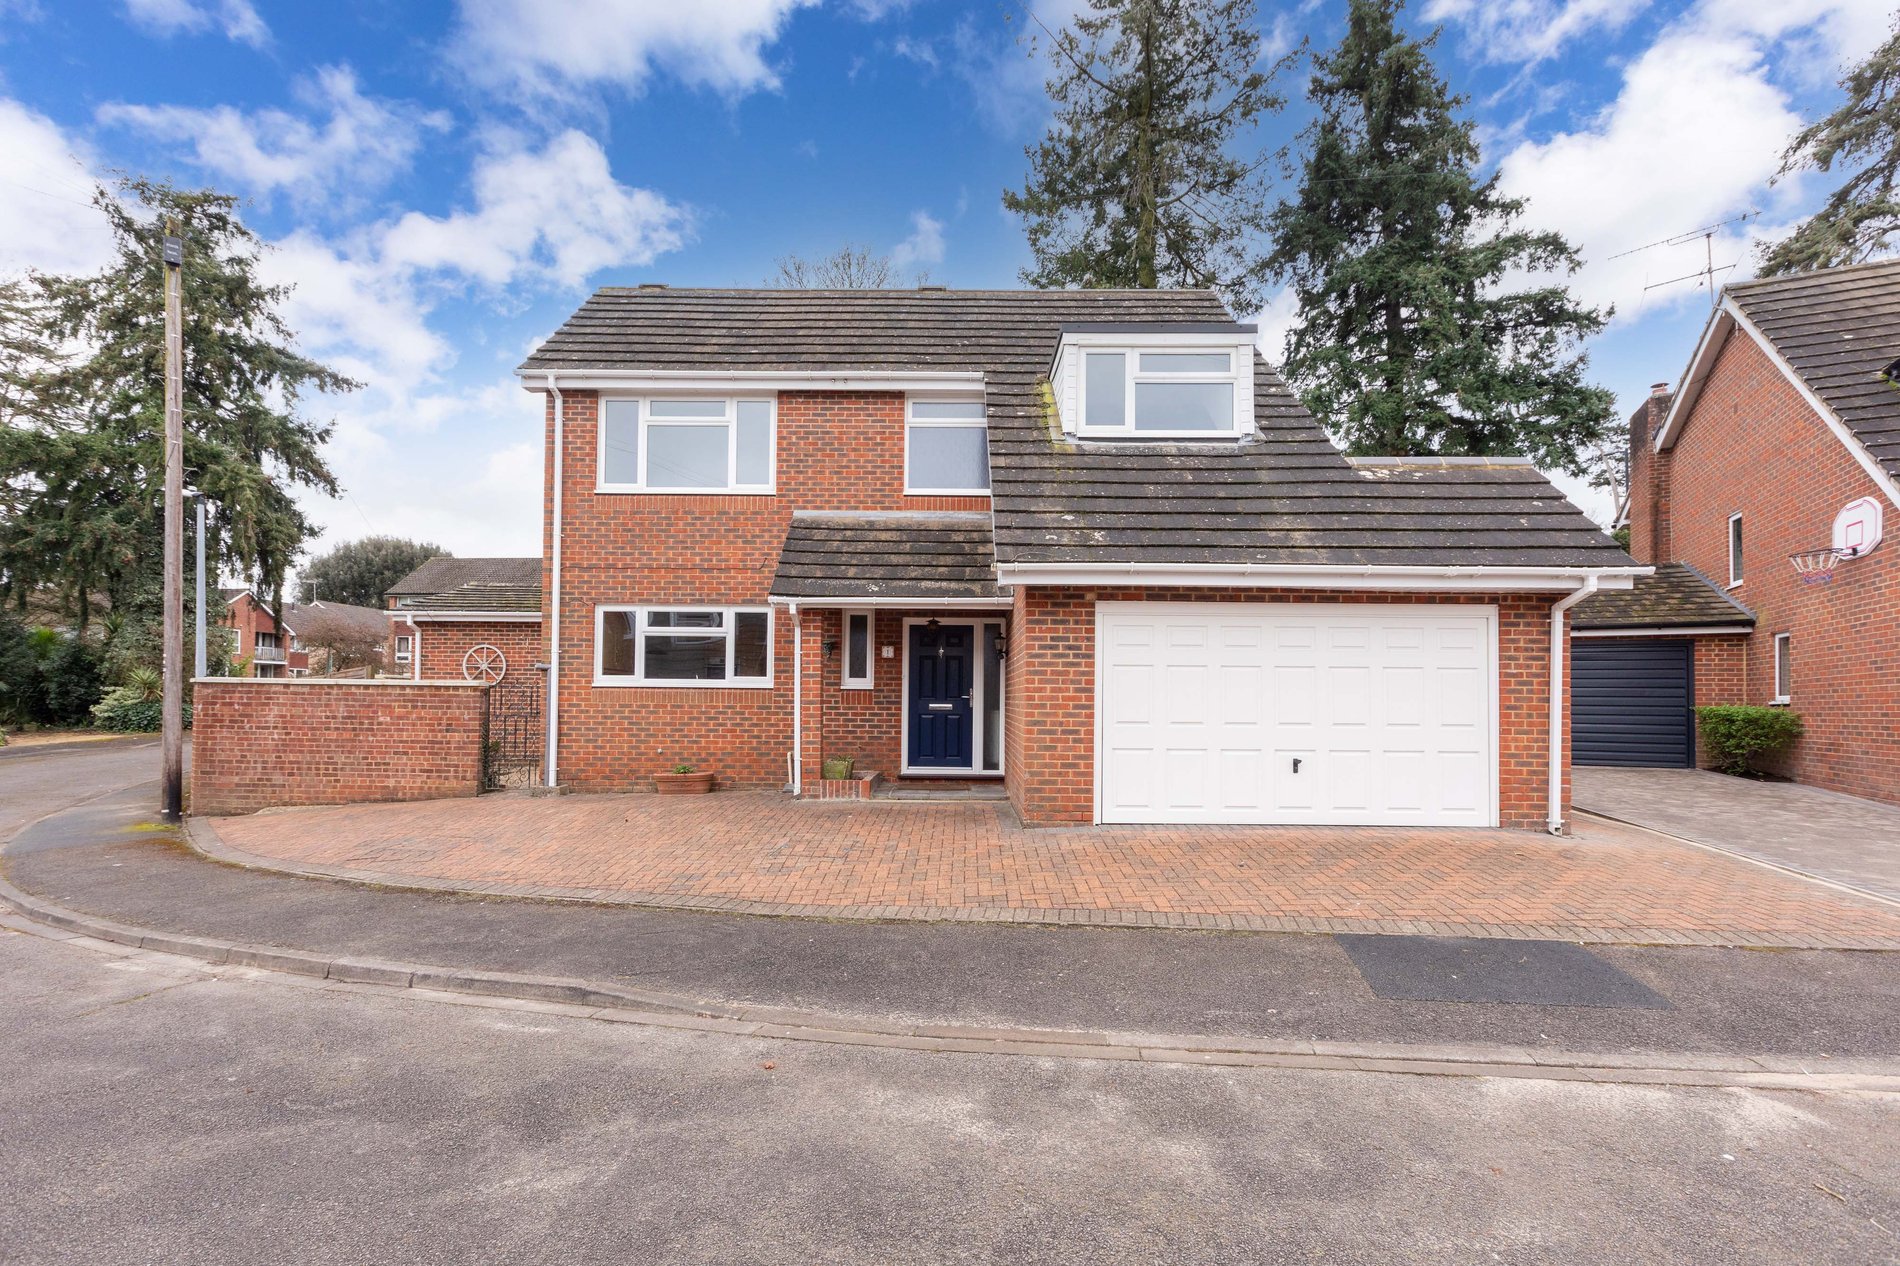 4 bed detached house for sale in Challow Court, Maidenhead  - Property Image 1